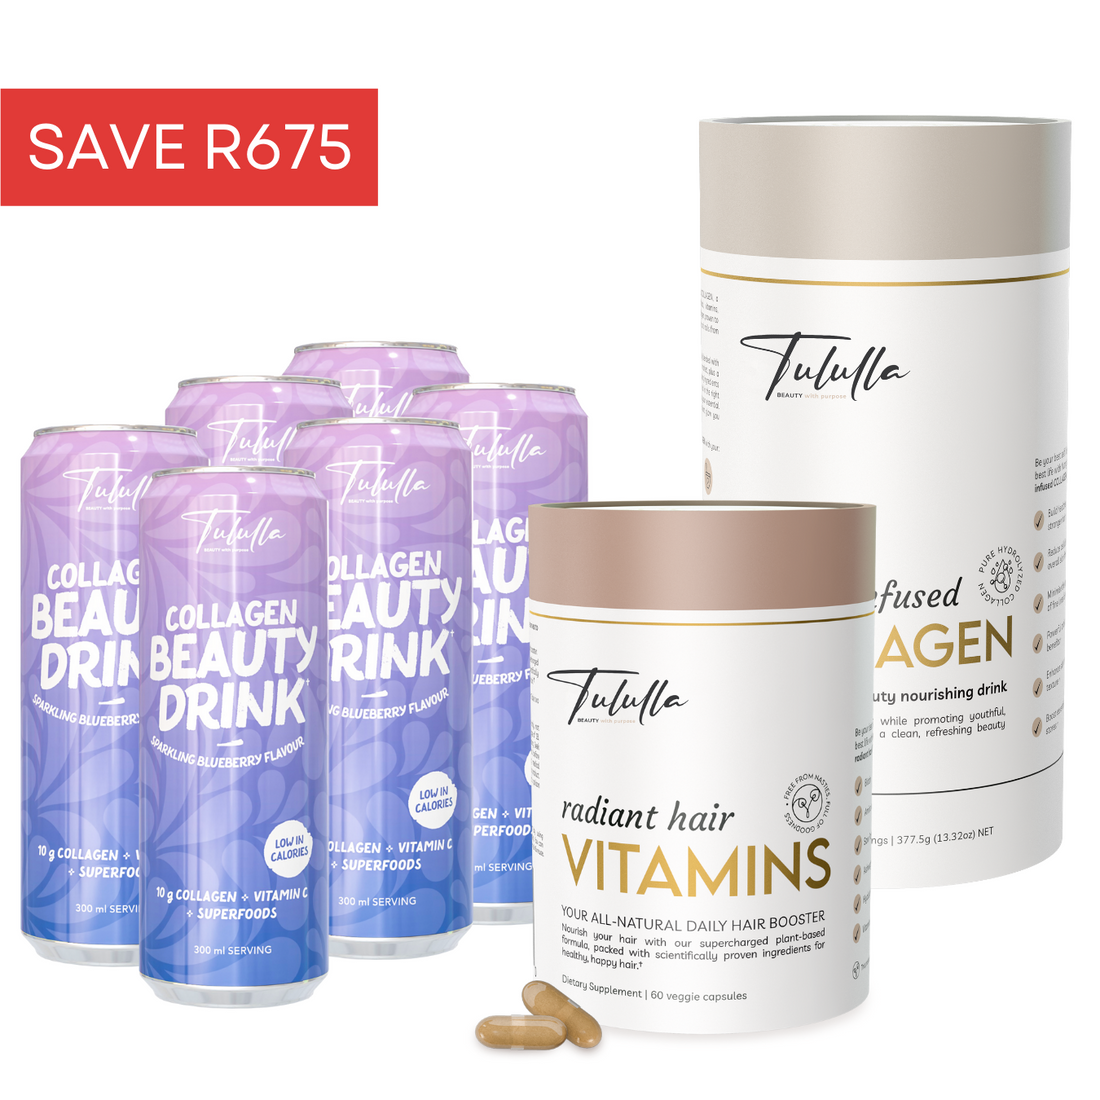 1 x Radiant Hair VITAMINS + Beauty Infused Collagen + 6 Free Drinks